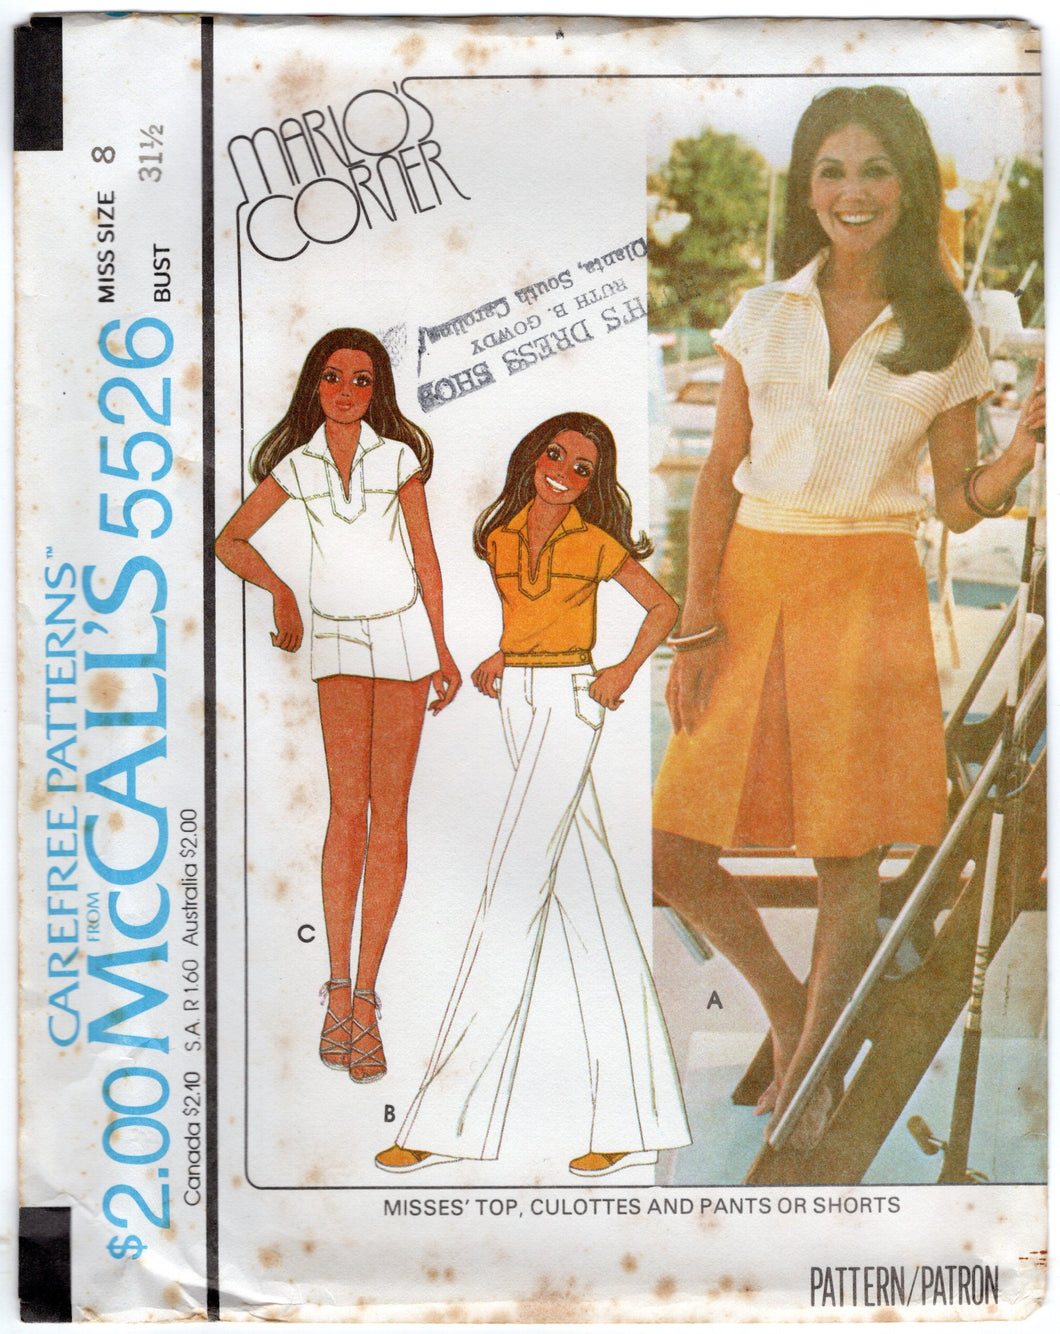 1970's McCall's Yoked Top, and Shorts, Culottes or Wide Leg Pants pattern - Marlo's Corner - Bust 31.5-38